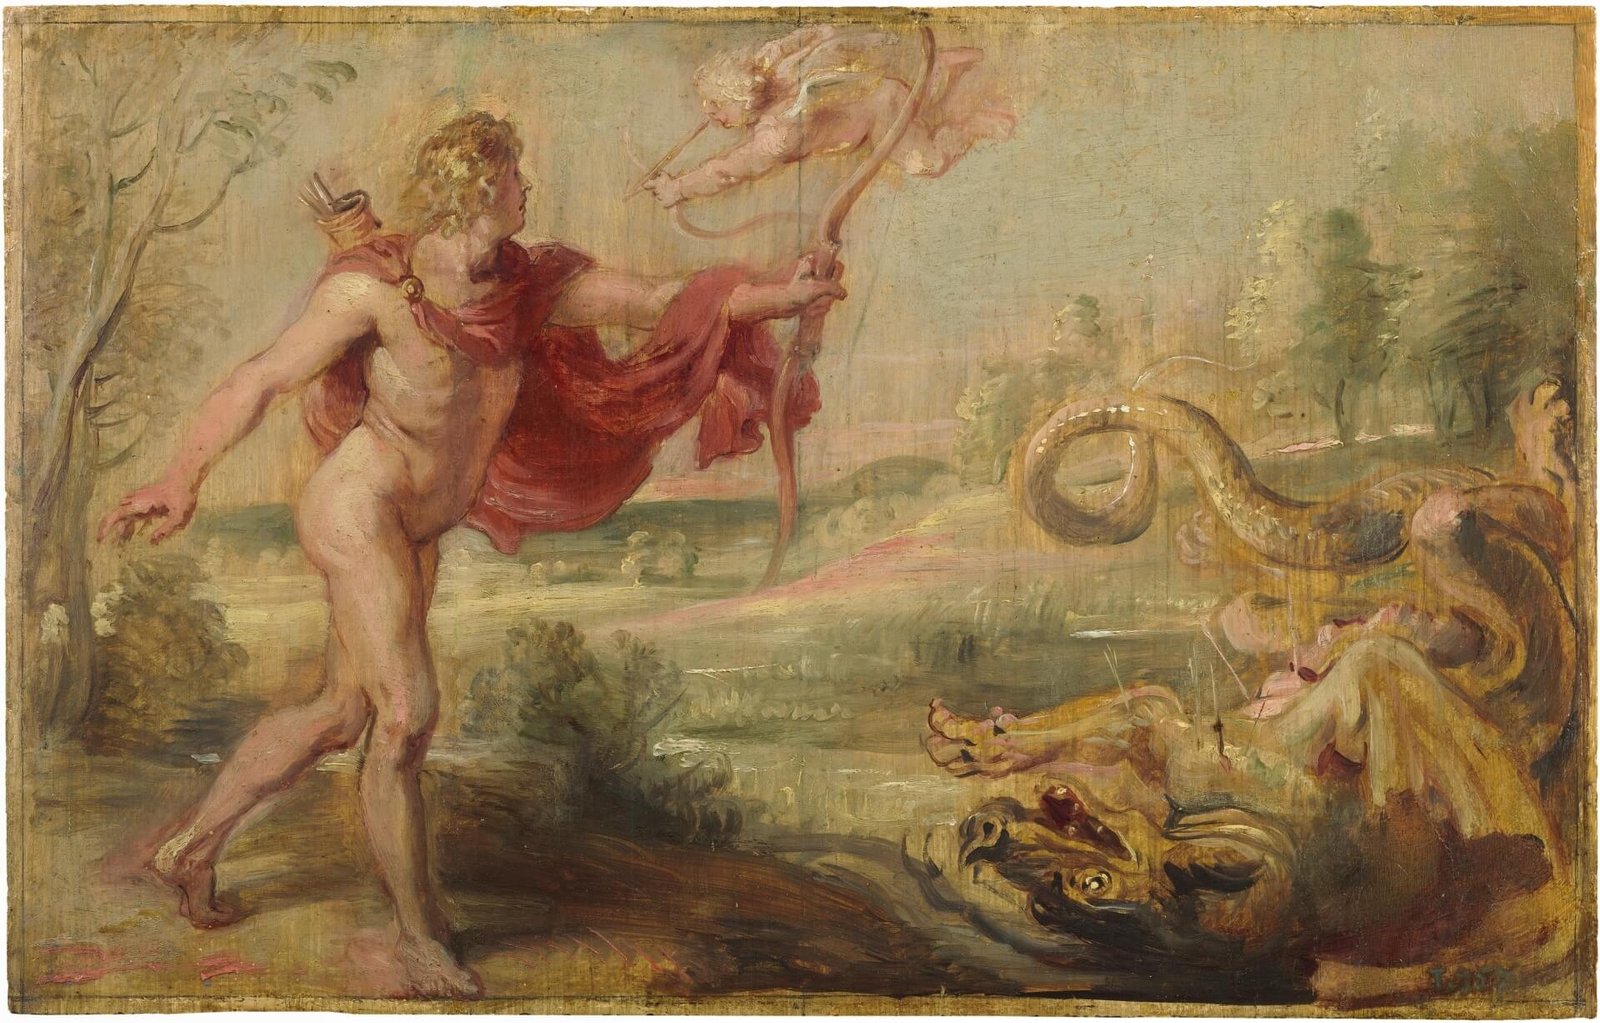 The painting represents a blonde chubby Apollo, and the corpse of the dragon Python (a servant of Hera), whom he just killed with bow and arrows.